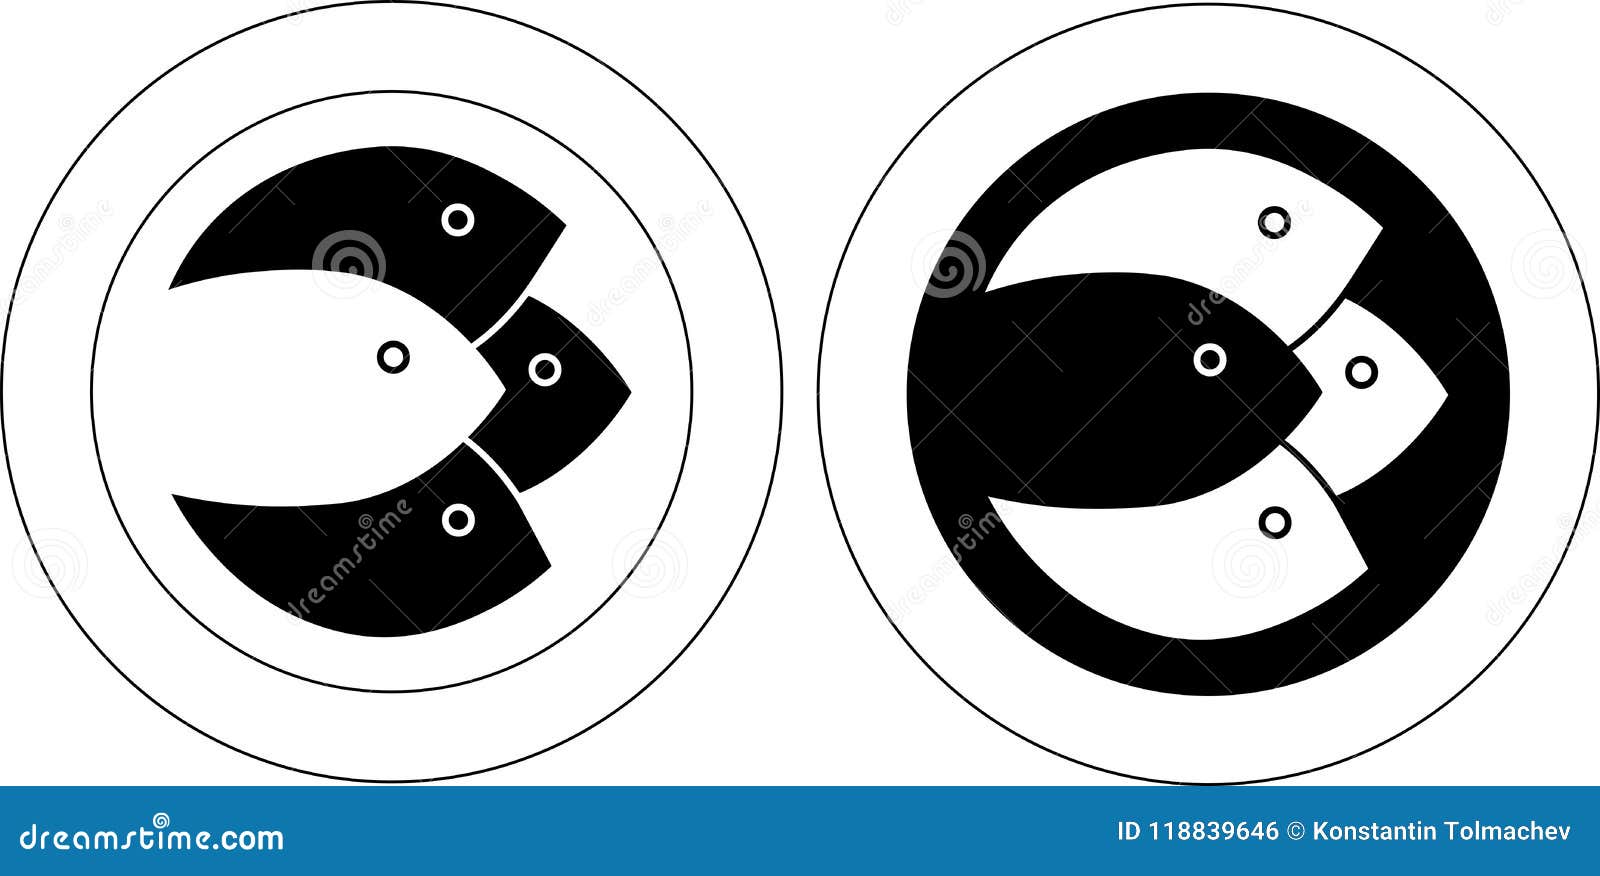 Download Silhouettes Of Four Fish In A Circle Fish Minimalistic ...